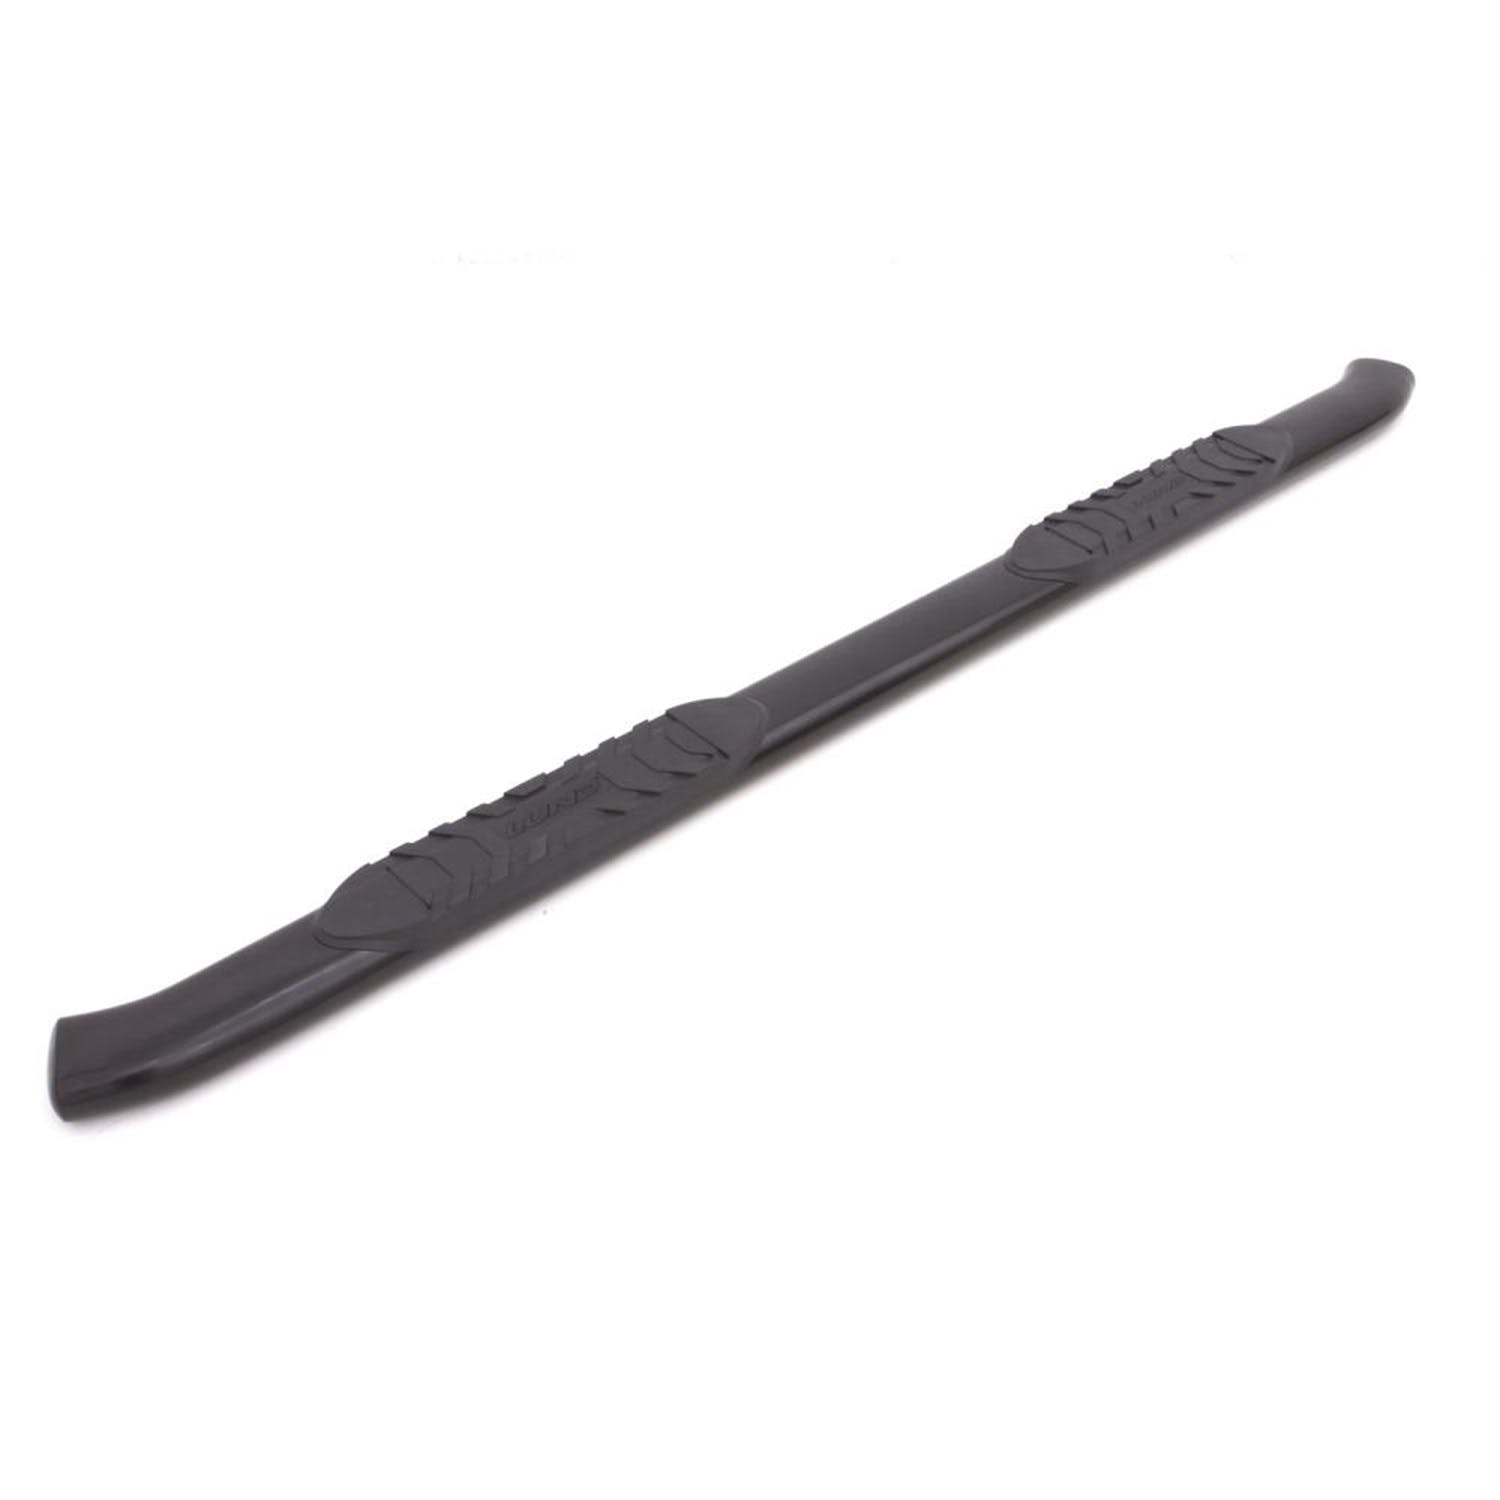 LUND 24210562 5 Inch Oval Curved Nerf Bar - Black LUND -5 inch CURVED OVAL BLACK SS